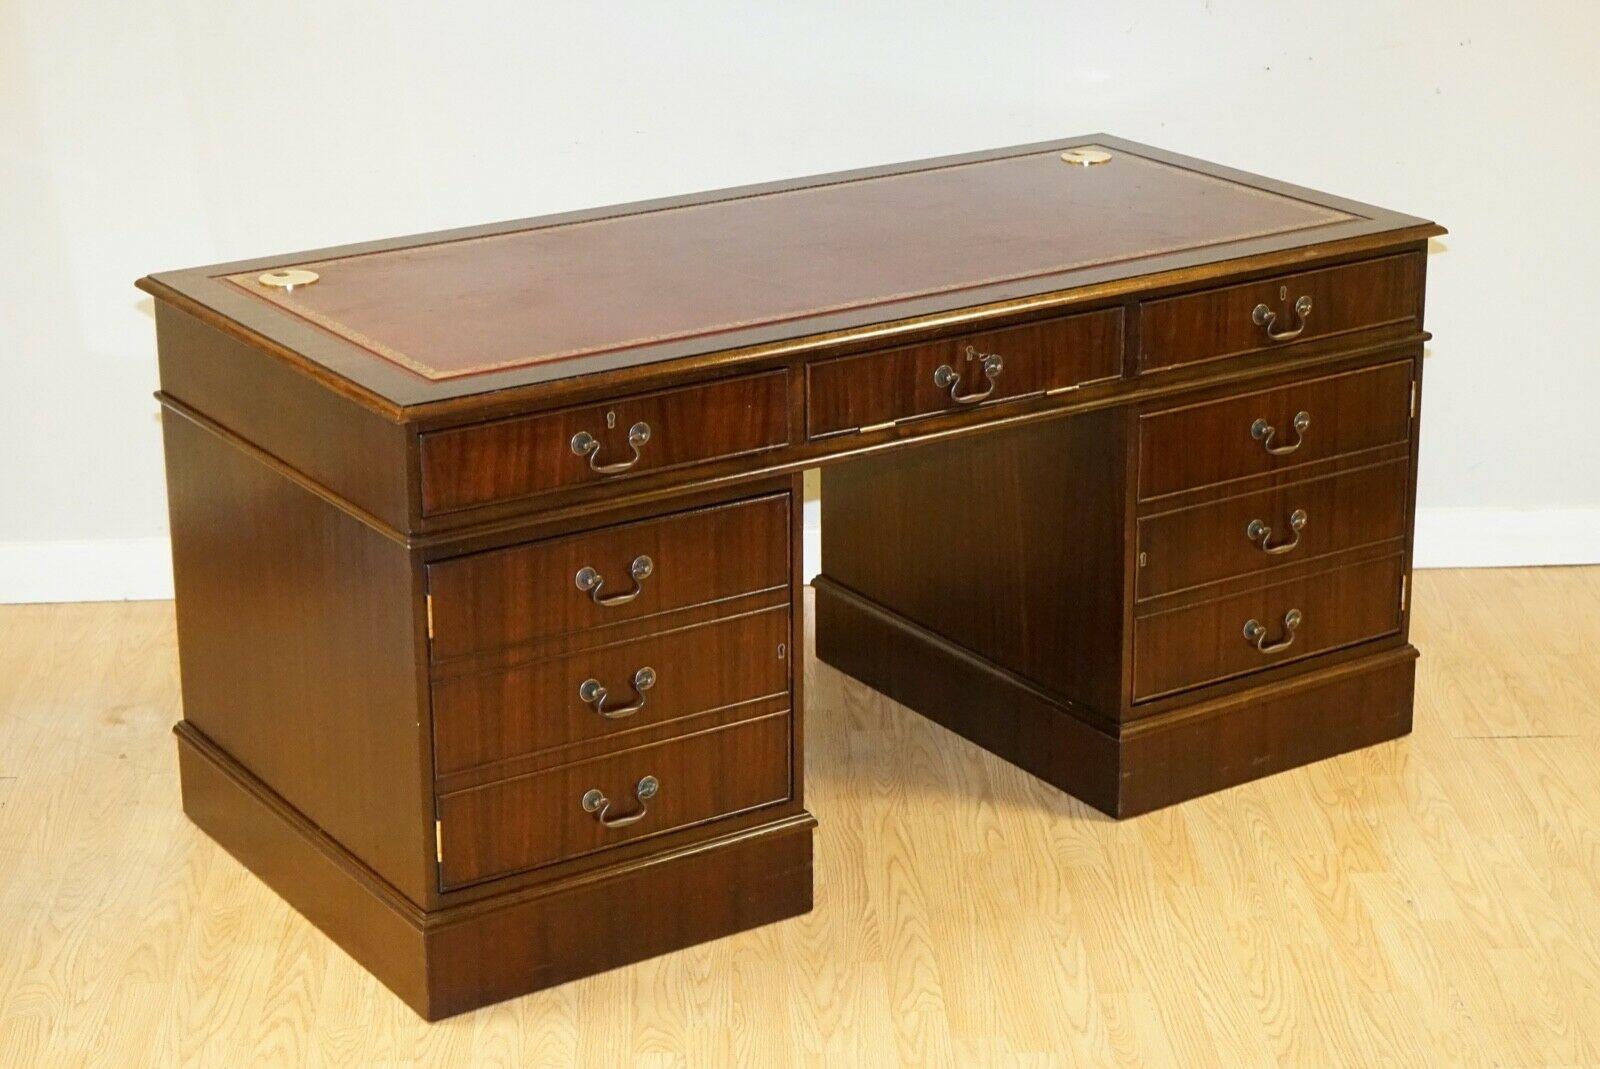 We are delighted to sell this Mahogany Pedestal Desk with Gold Embossed Burgundy Leather Top.

It has barely any noticeable wear all around, it must have been hardly used.

The desk has two brass grommets on the top back corners for cables and